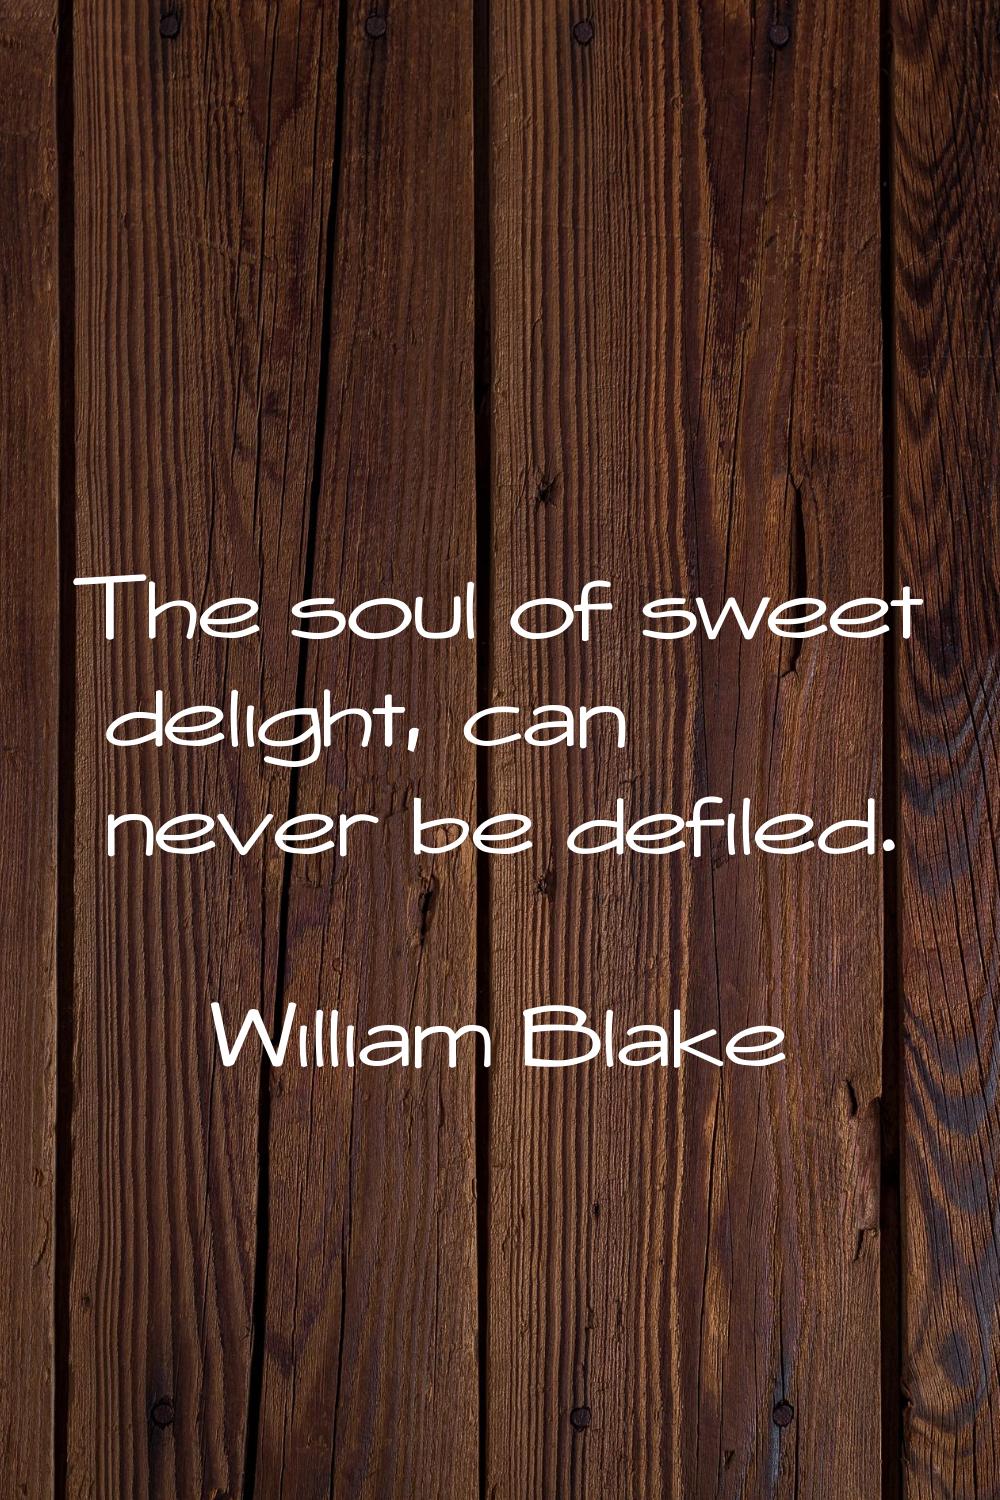 The soul of sweet delight, can never be defiled.